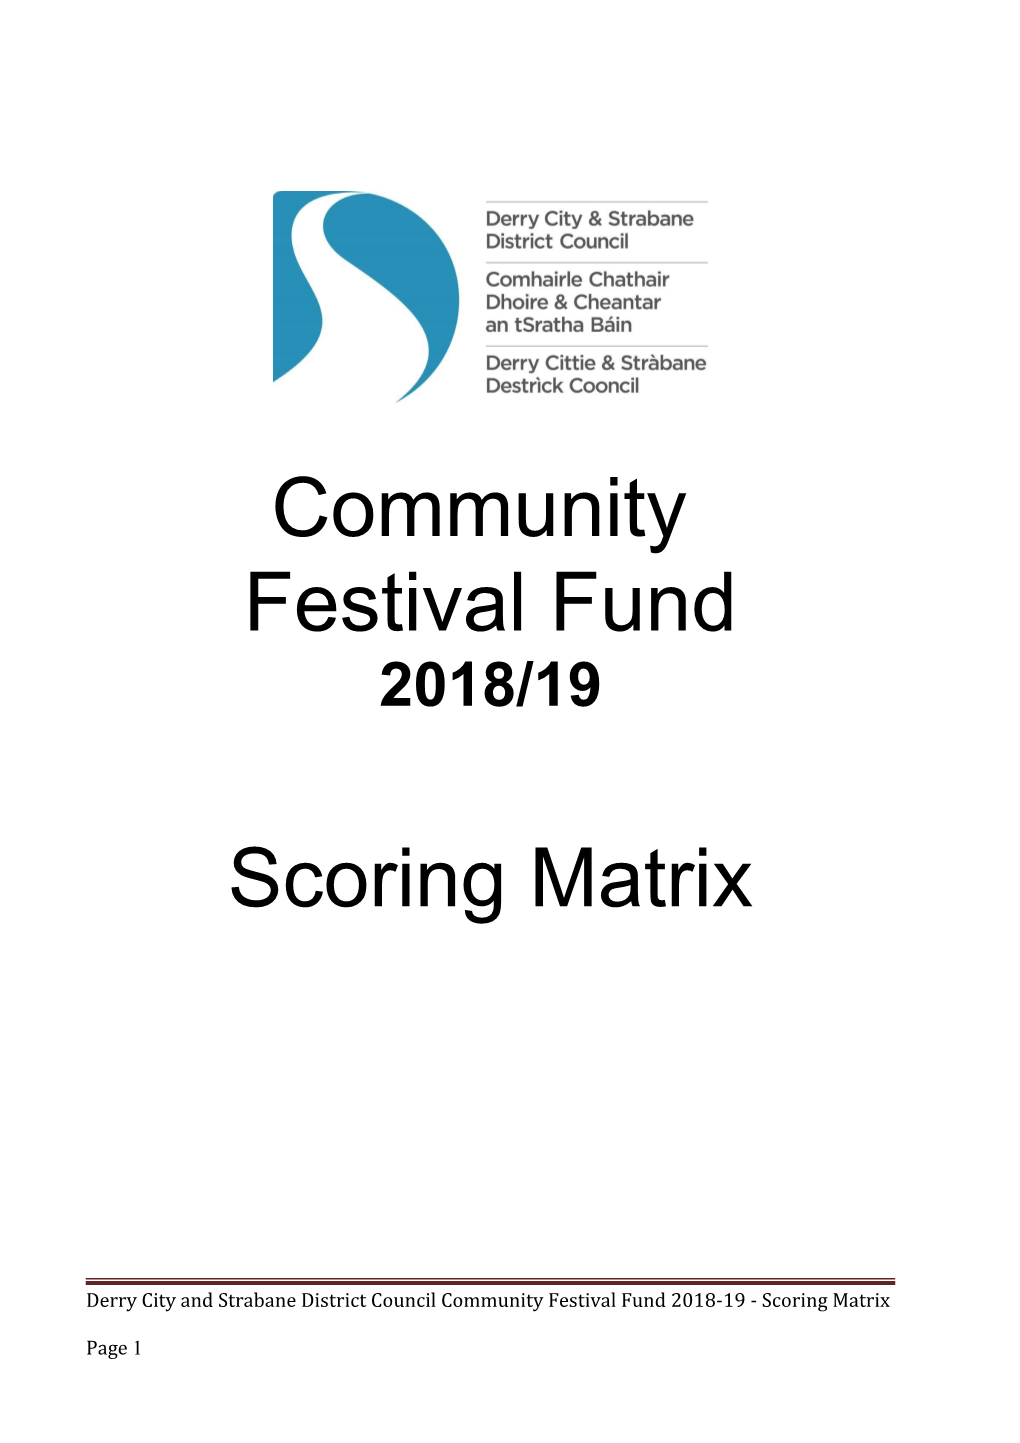 Derry City and Strabane District Council Community Festival Fund 2018/19